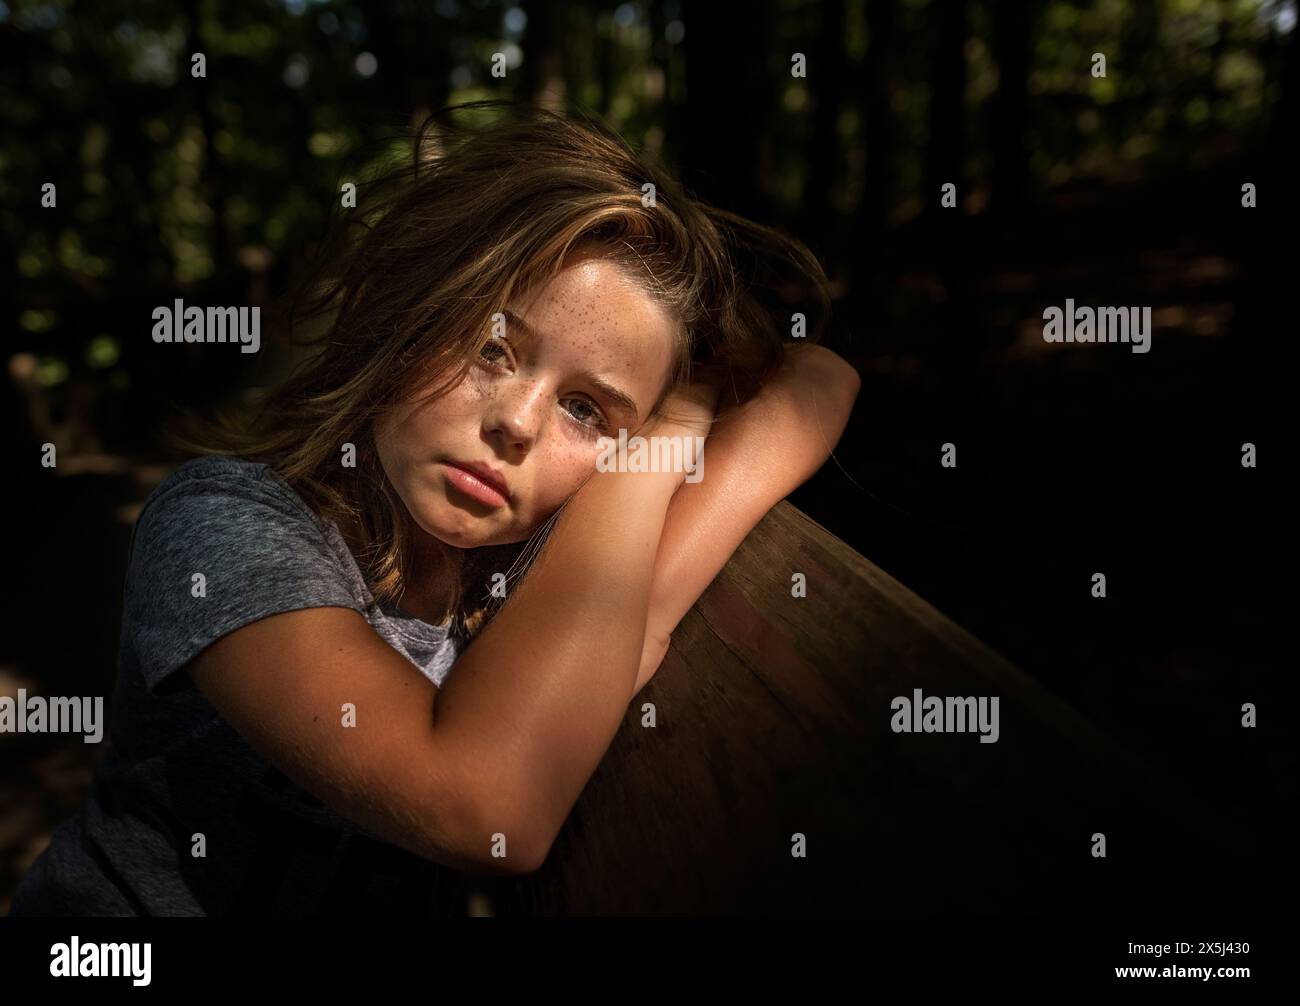 Portrait of Beautiful girl with freckles Stock Photo